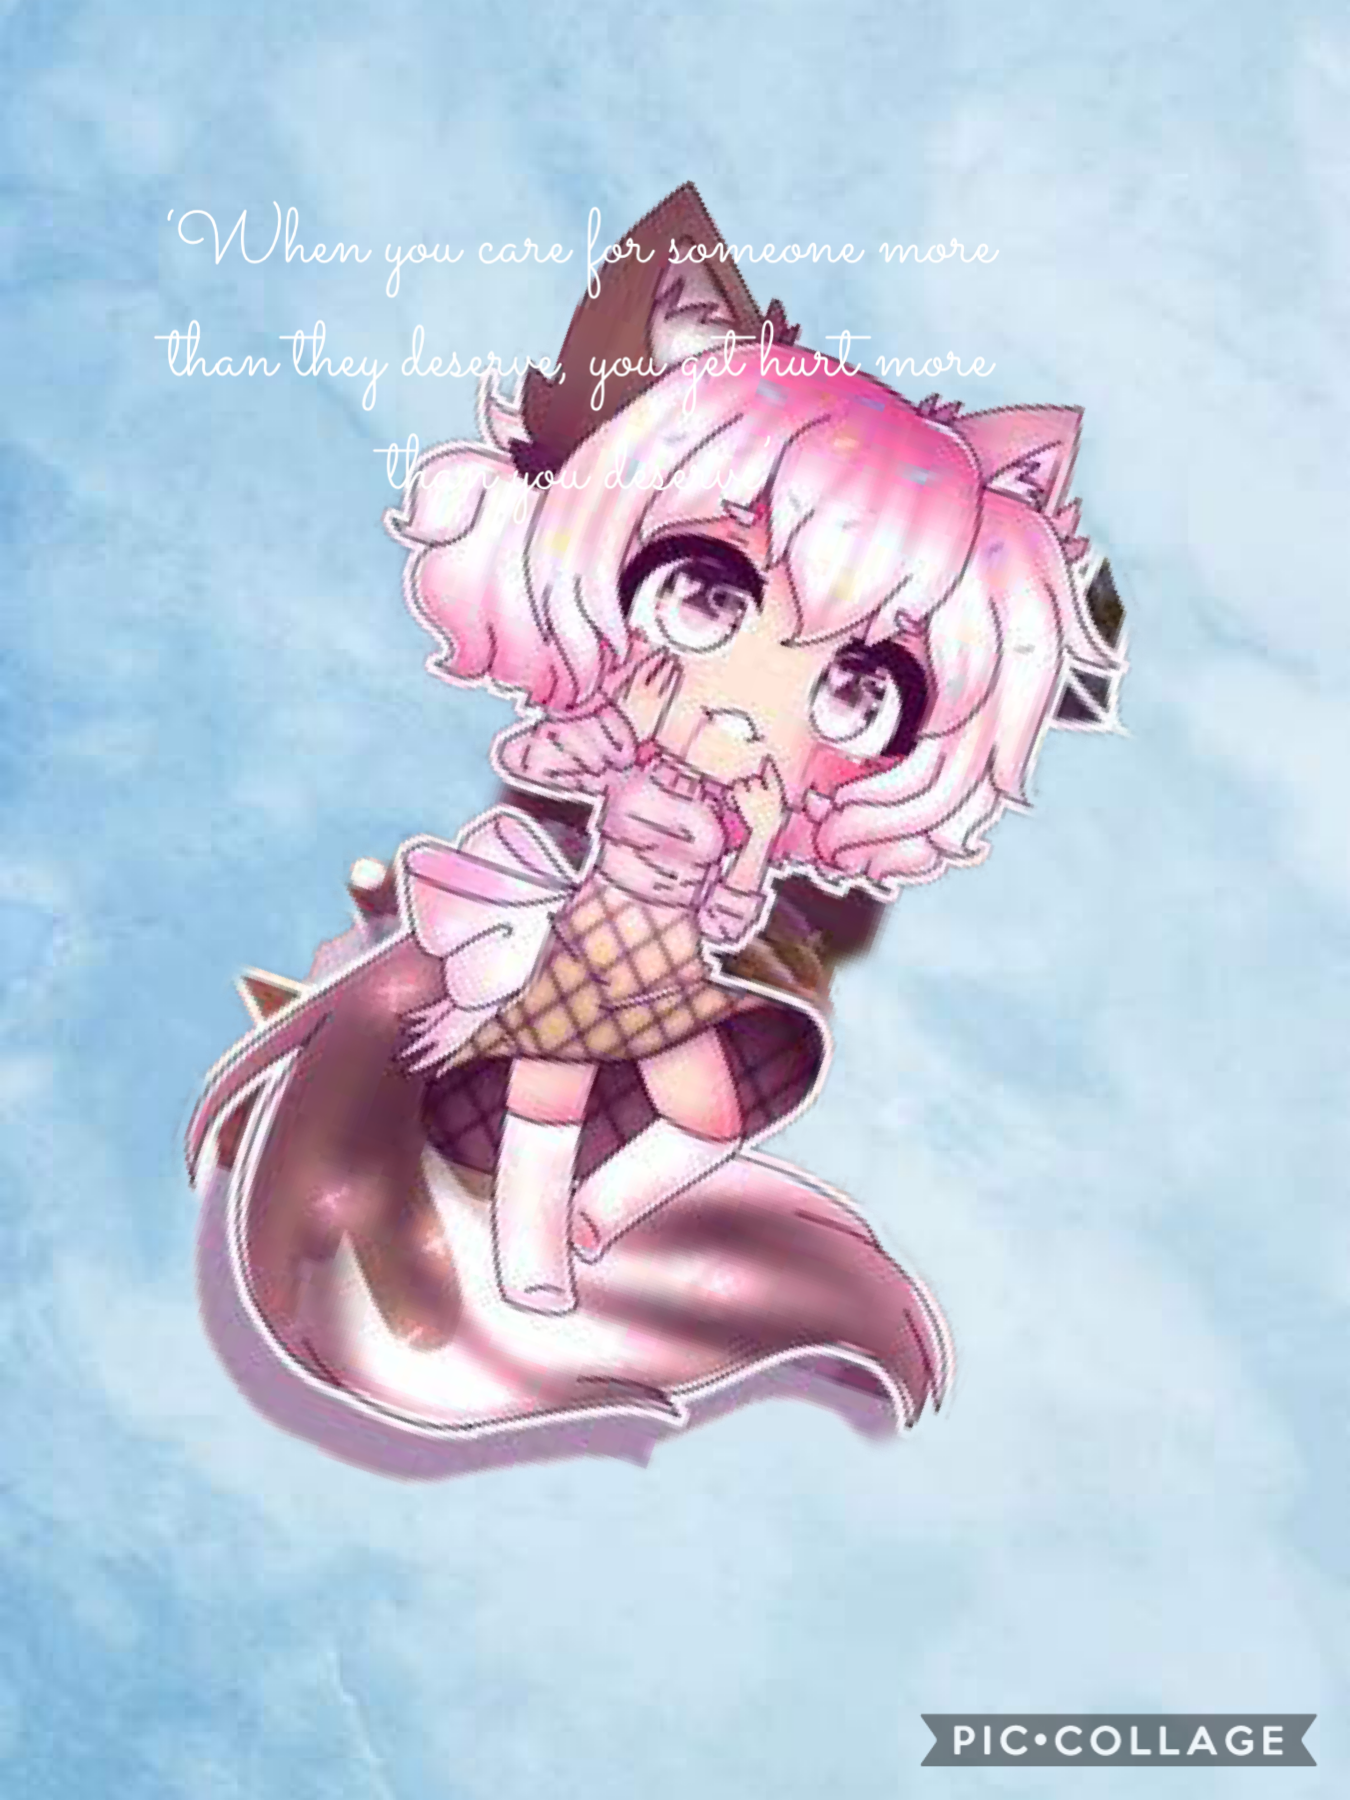 Yes another gacha life edit! I don’t know about this one...It seems a bit kawaii but that’s all me! Love you! I will try to follow everyone I can!